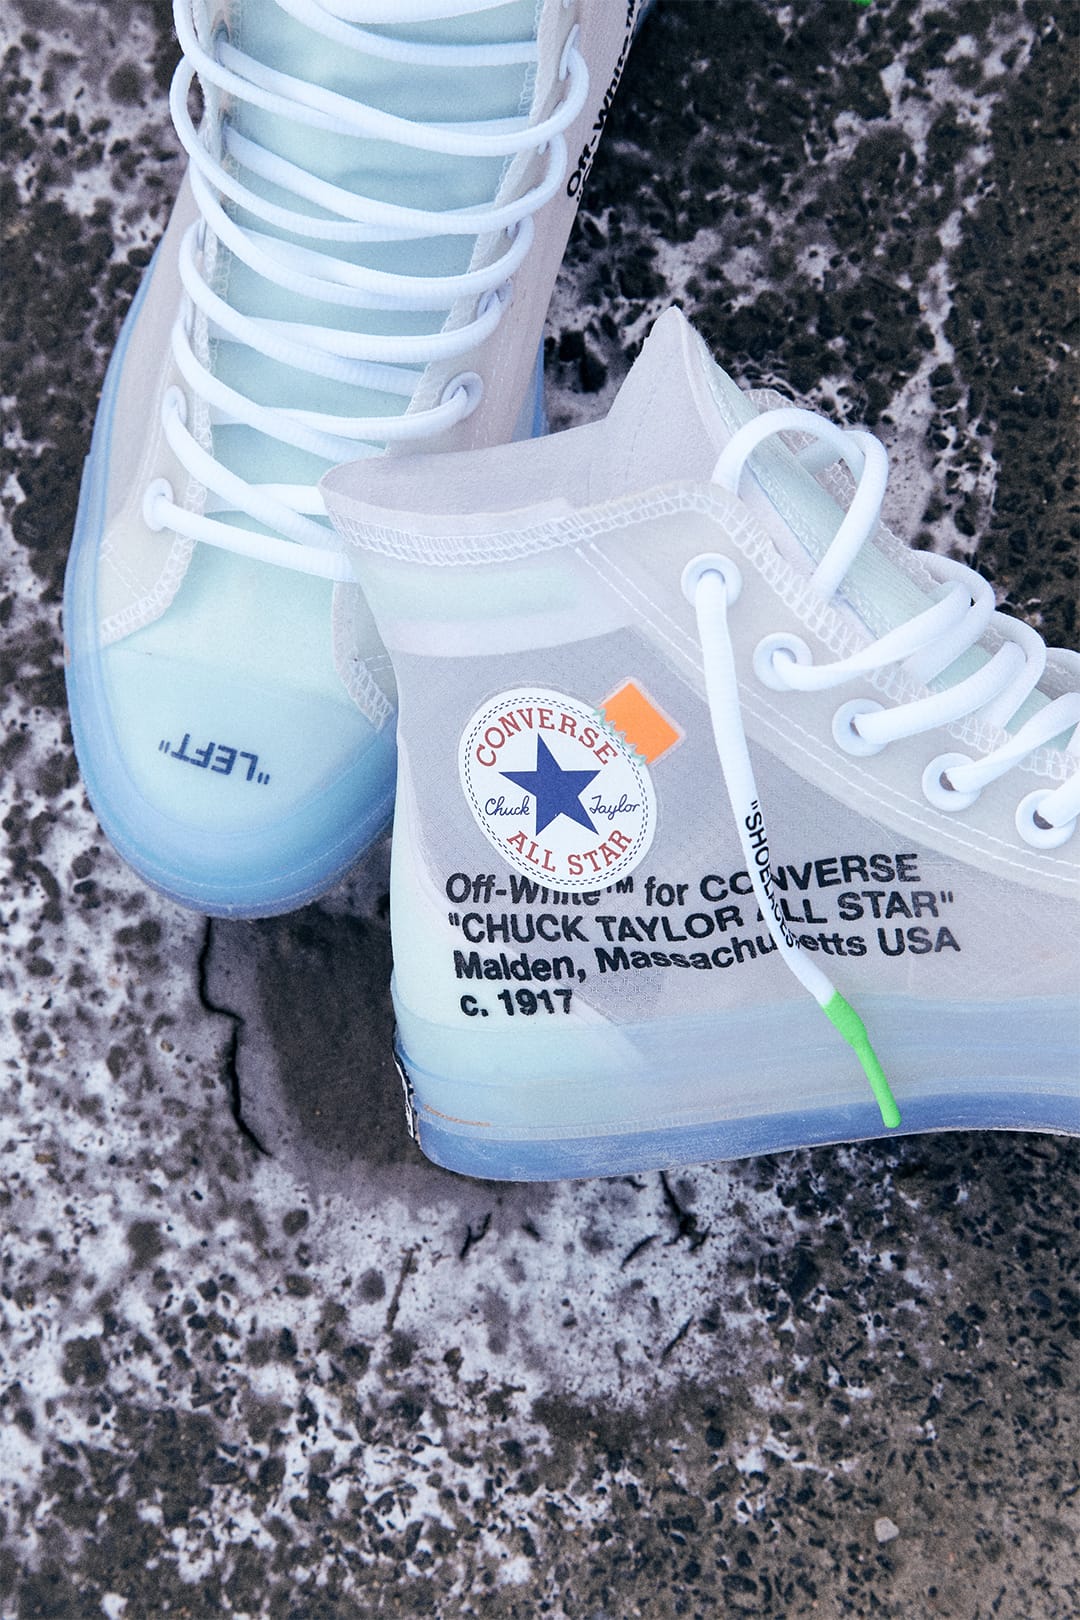 Converse Chuck 70 x Off-White - Register Now on END. Launches